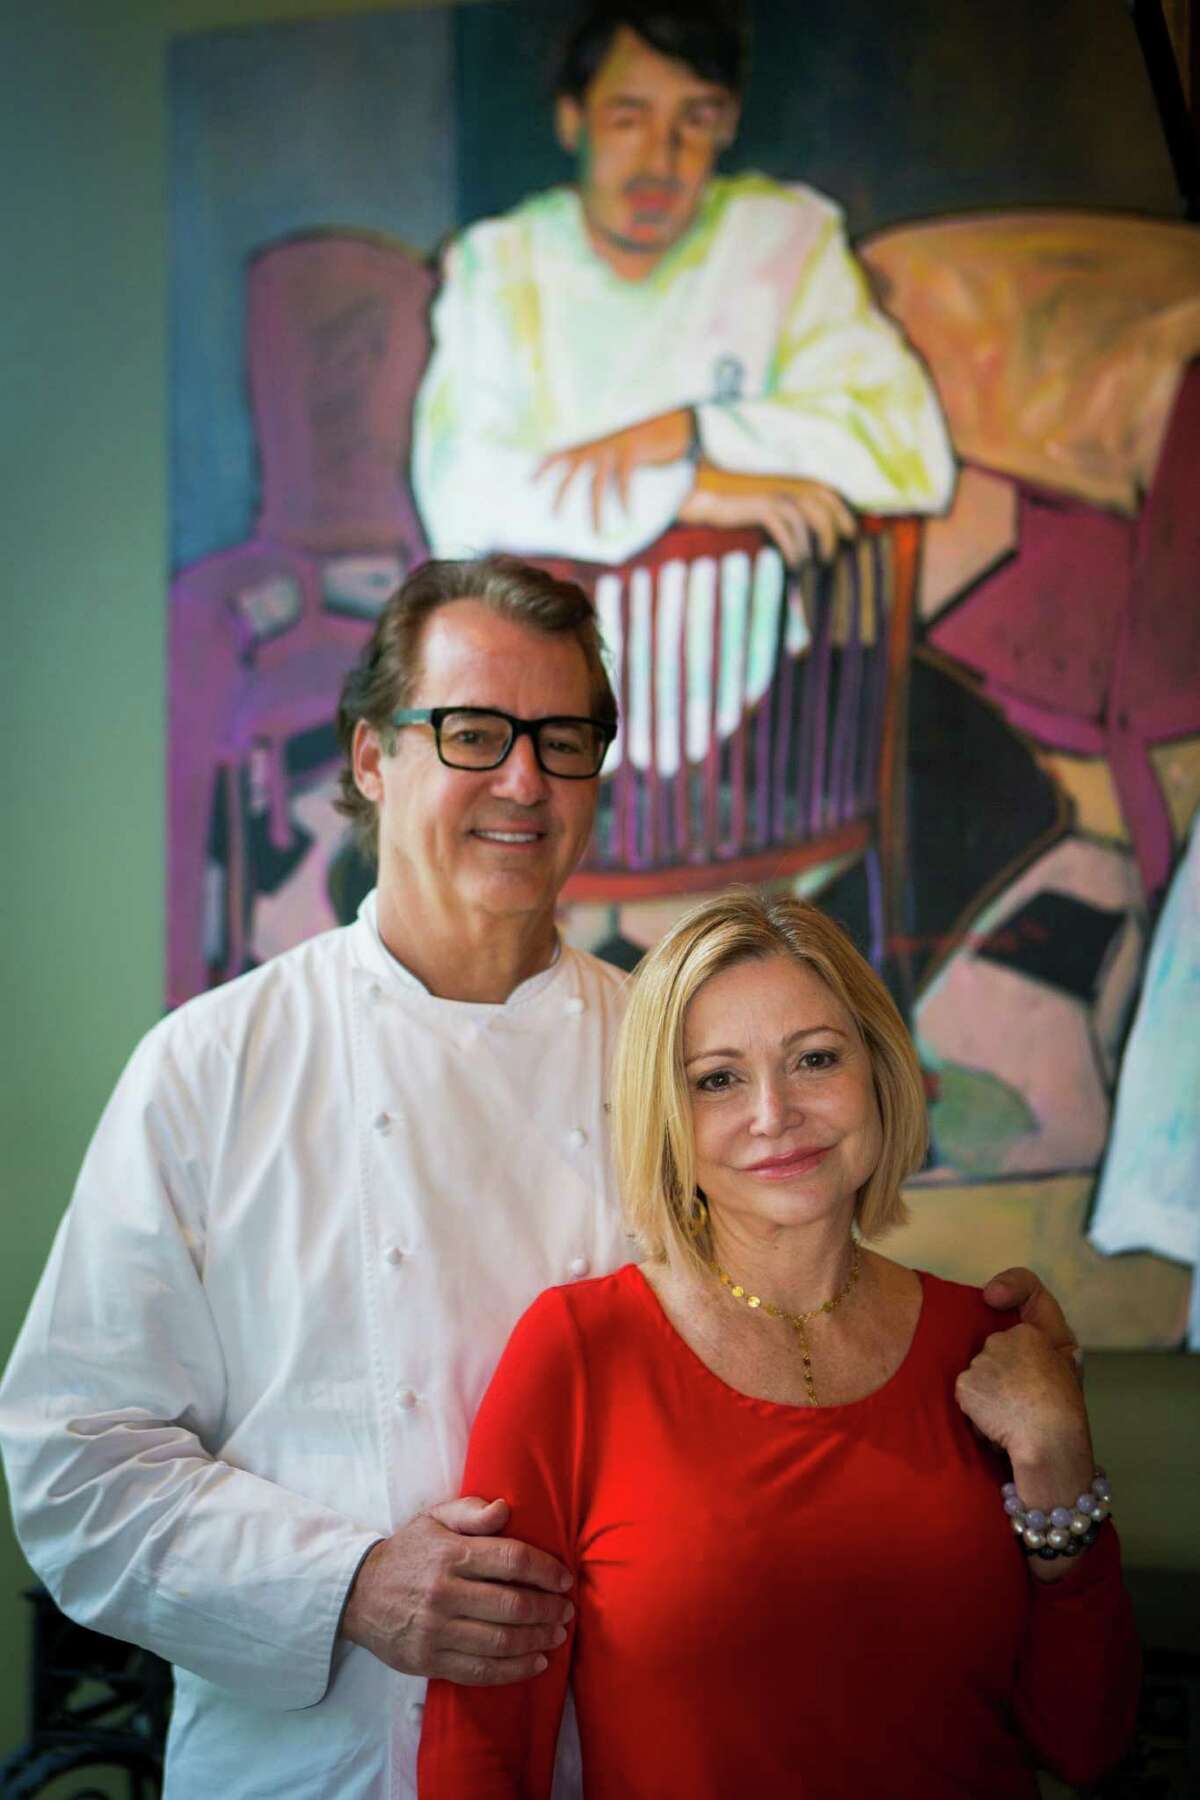 Robert Del Grande and his wife Mimi Del Grande are the owners of the restaurant, RDG & Bar Annie, which had its roots as Cafe Annie and will return to that old name and original menu items. Del Grande, Houston's first celebrity chef, is overseeing the revival of Cafe Annie as part of the restaurant's 35-year anniversary. Monday, May 9, 2016, in Houston. ( Marie D. De Jesus / Houston Chronicle )